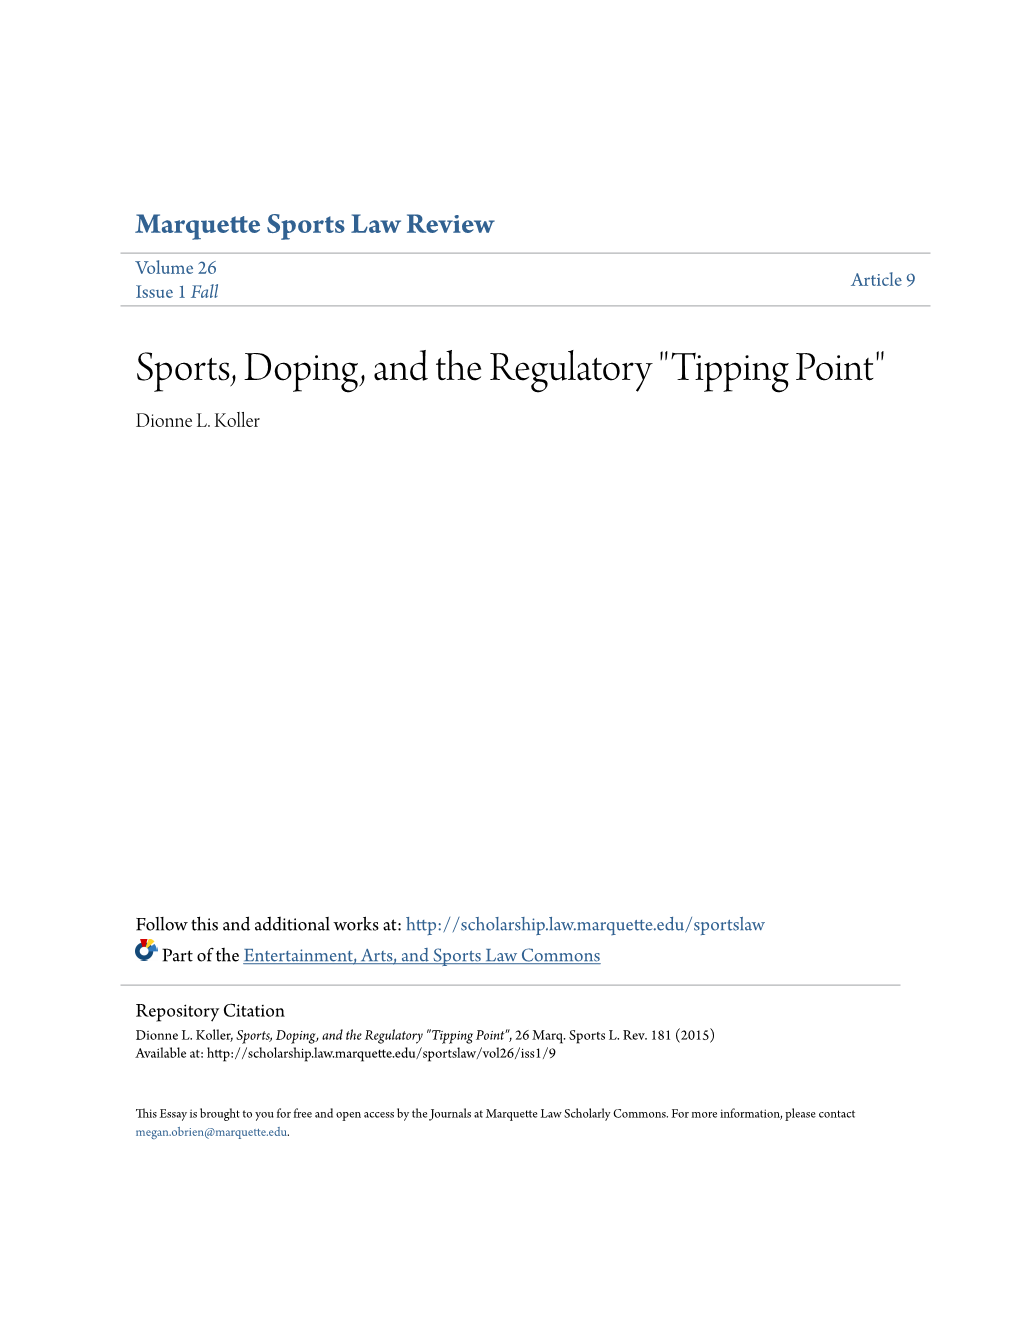 Sports, Doping, and the Regulatory "Tipping Point" Dionne L